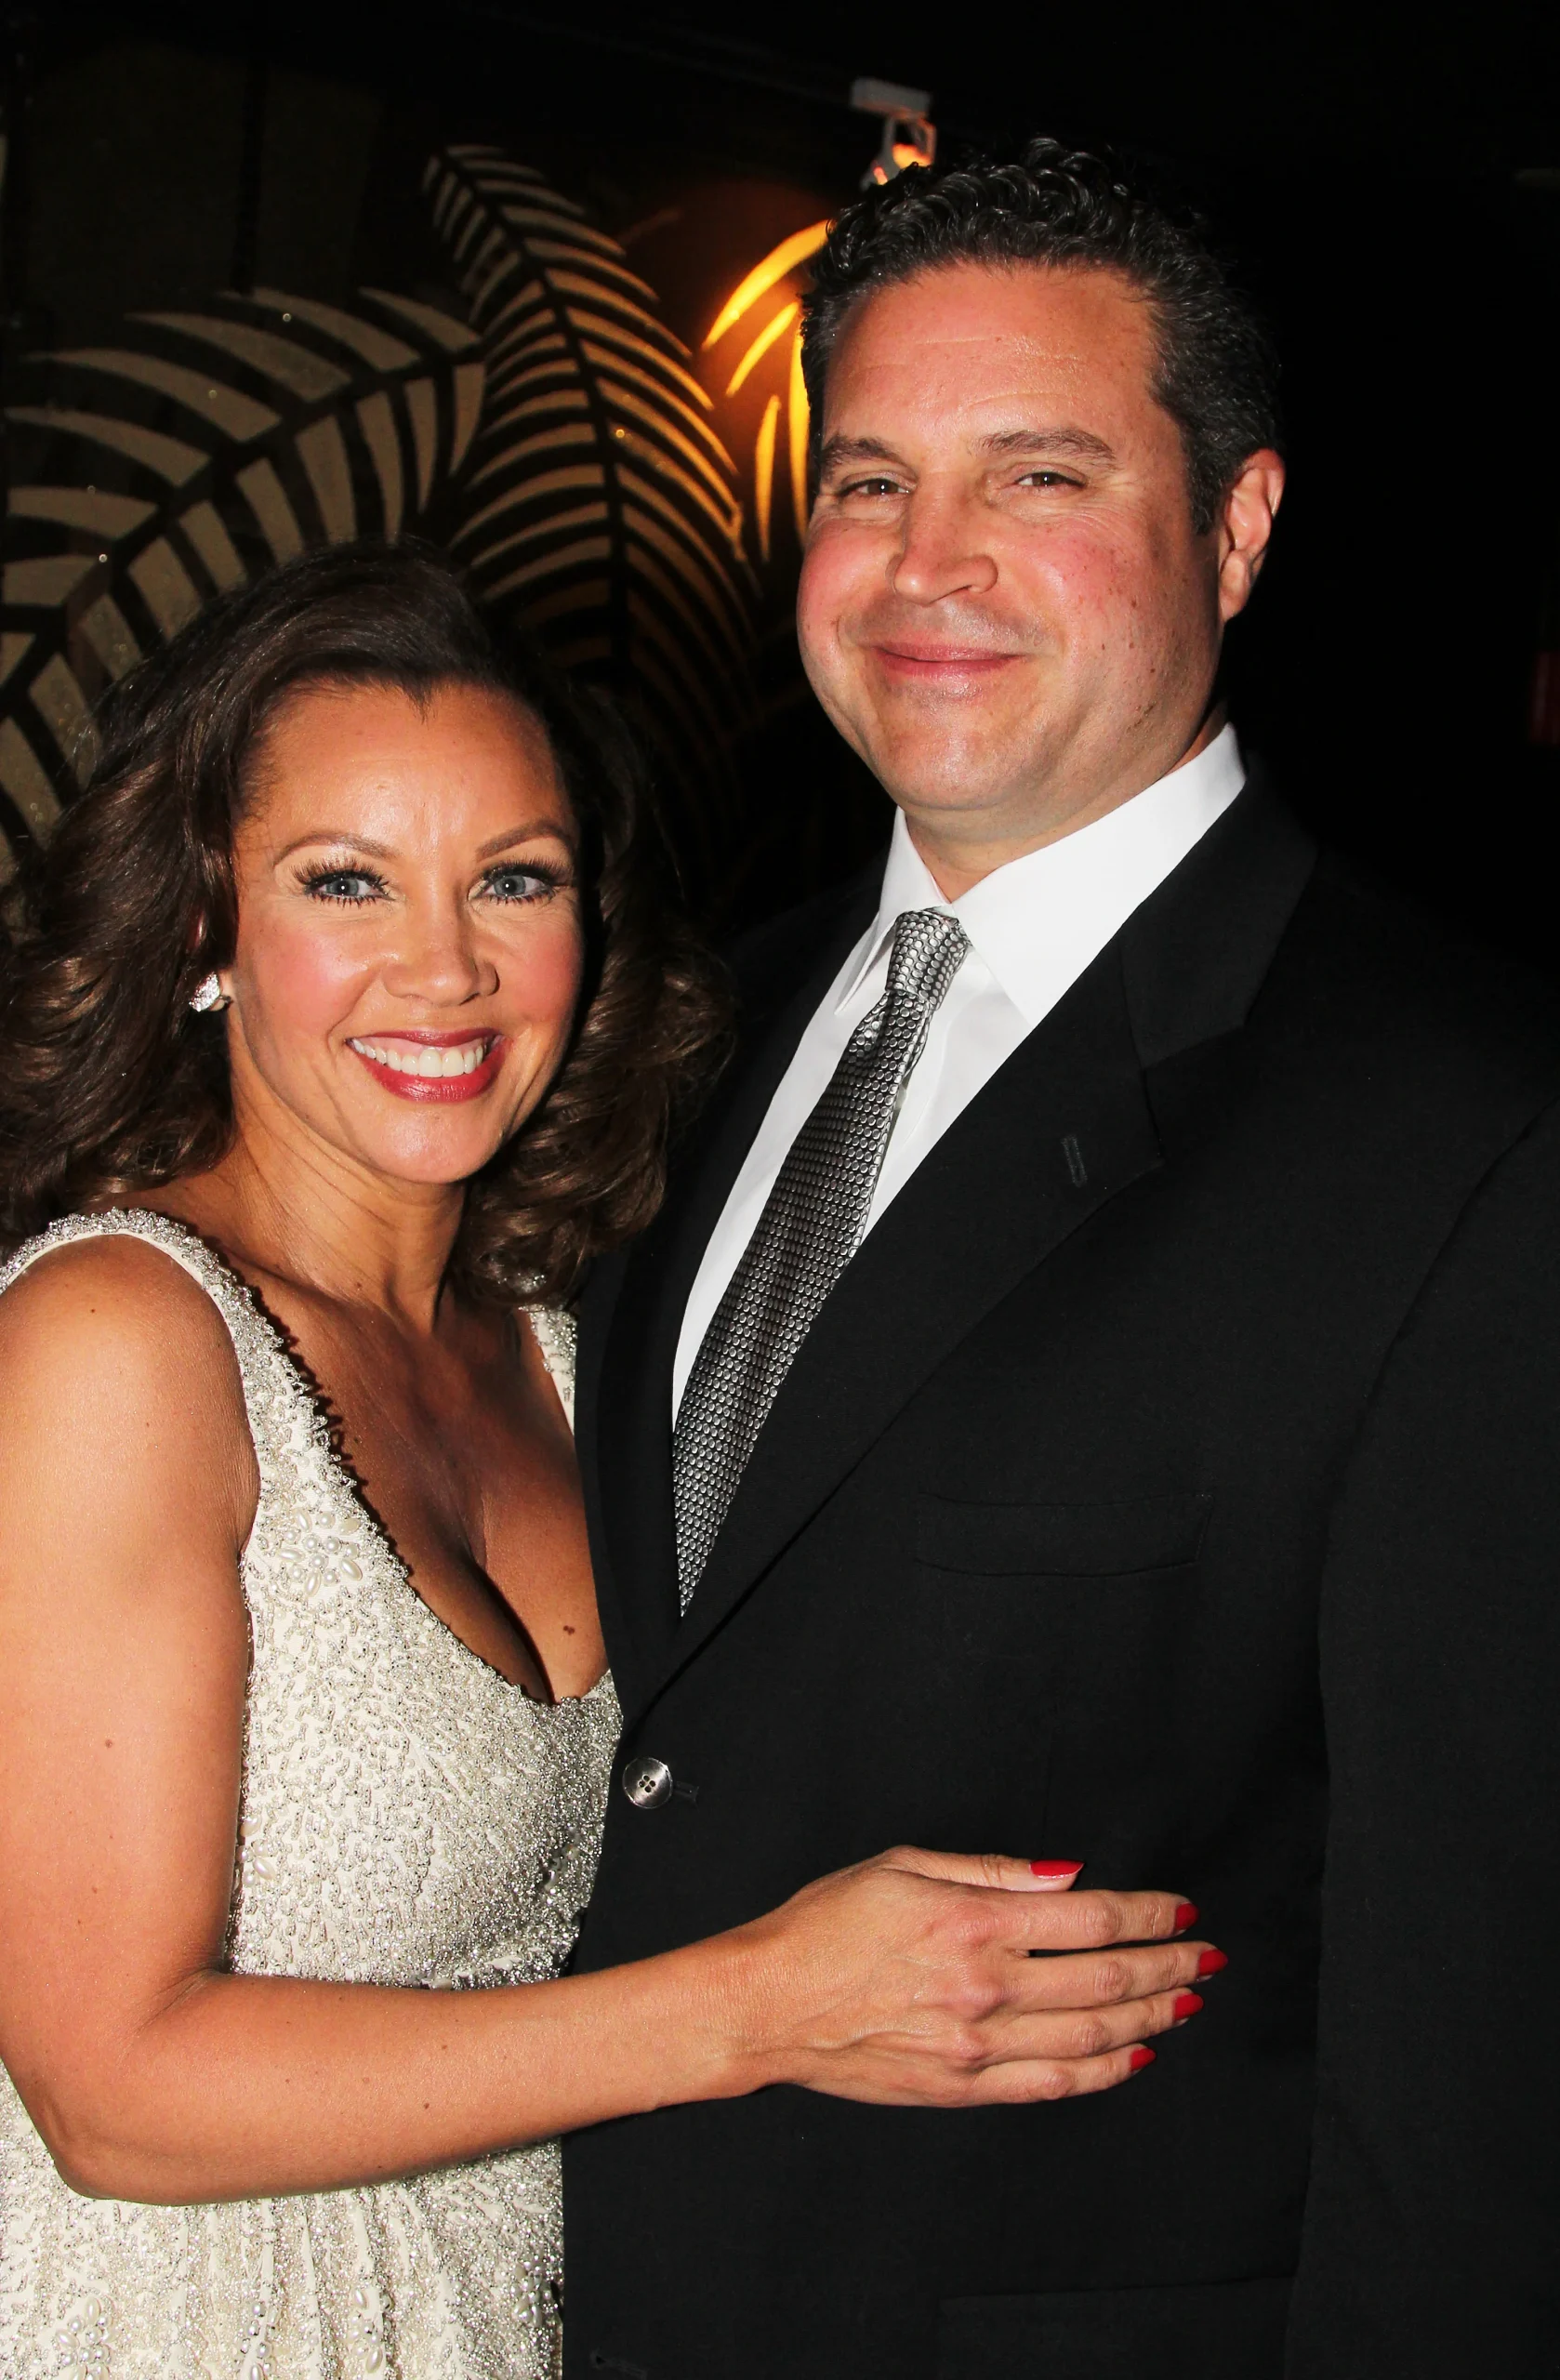 Who Is Jim Skrip? Age, Bio, Career And More Of Vanessa Williams' Husband